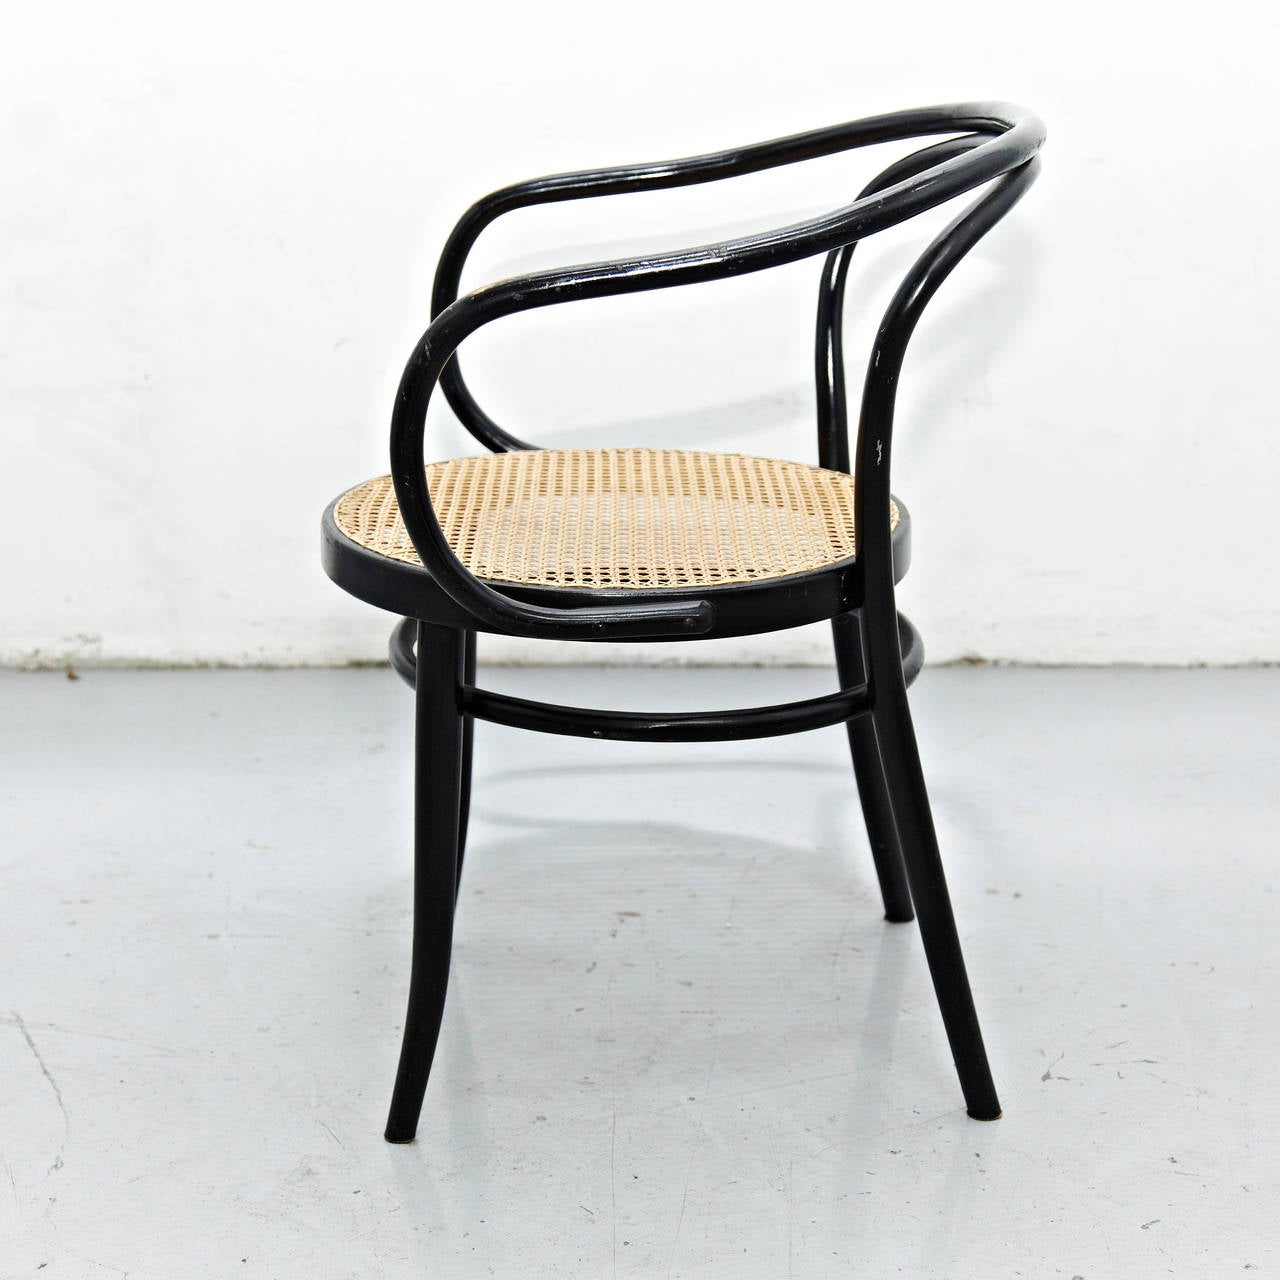 Thonet 209 by Auguste Thonet for Thonet manufactured In Germany.
Bentwood and rattan.

In good original condition, with minor wear consistent with age and use, preserving a beautiful patina.

In the 1830s, Thonet began trying to make furniture